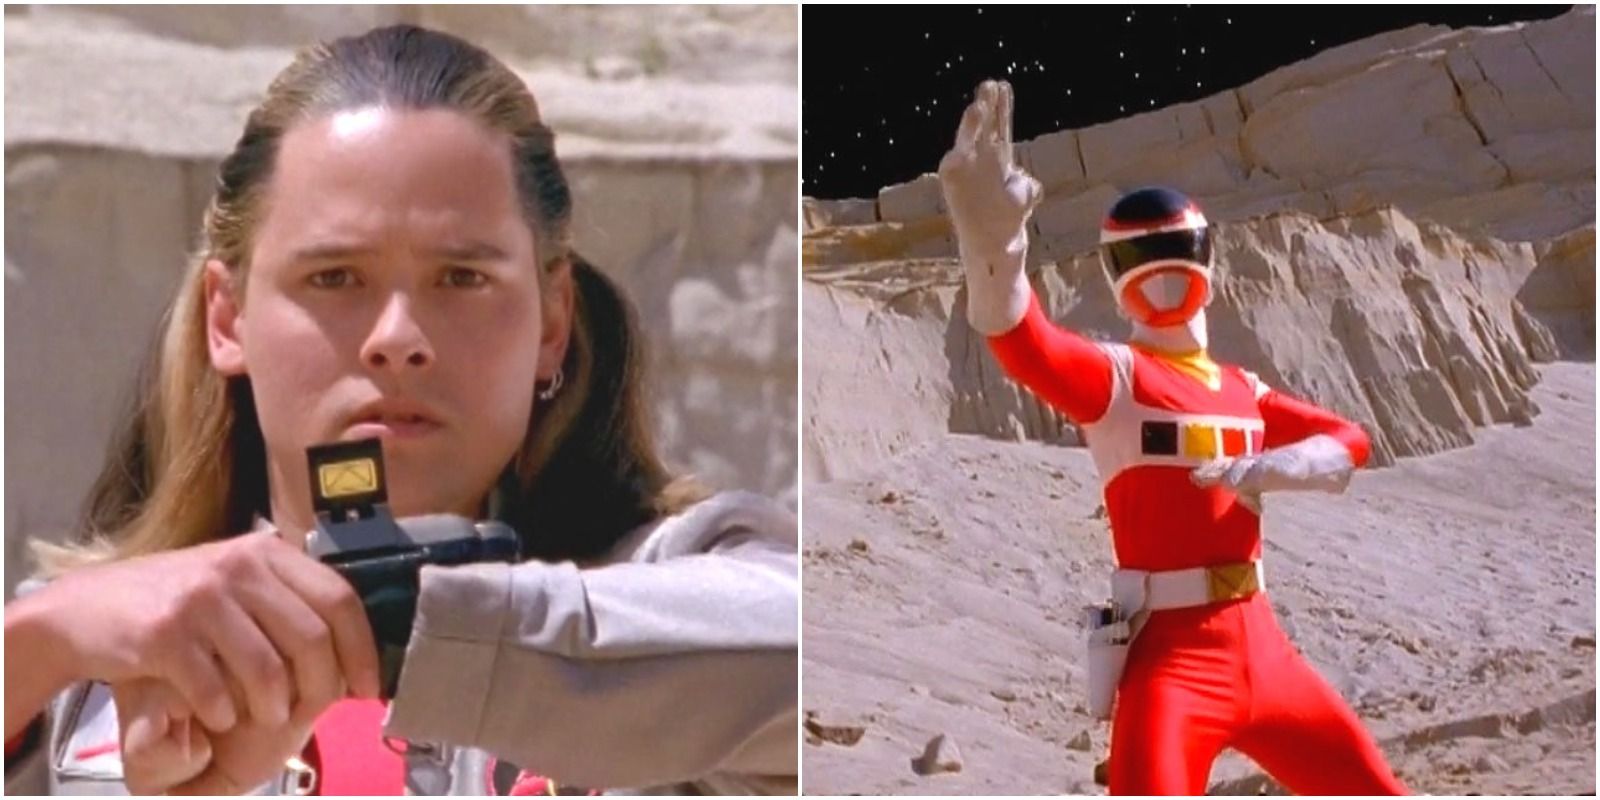 Power Rangers: 10 Teams Where The Red Ranger Isn't The Strongest